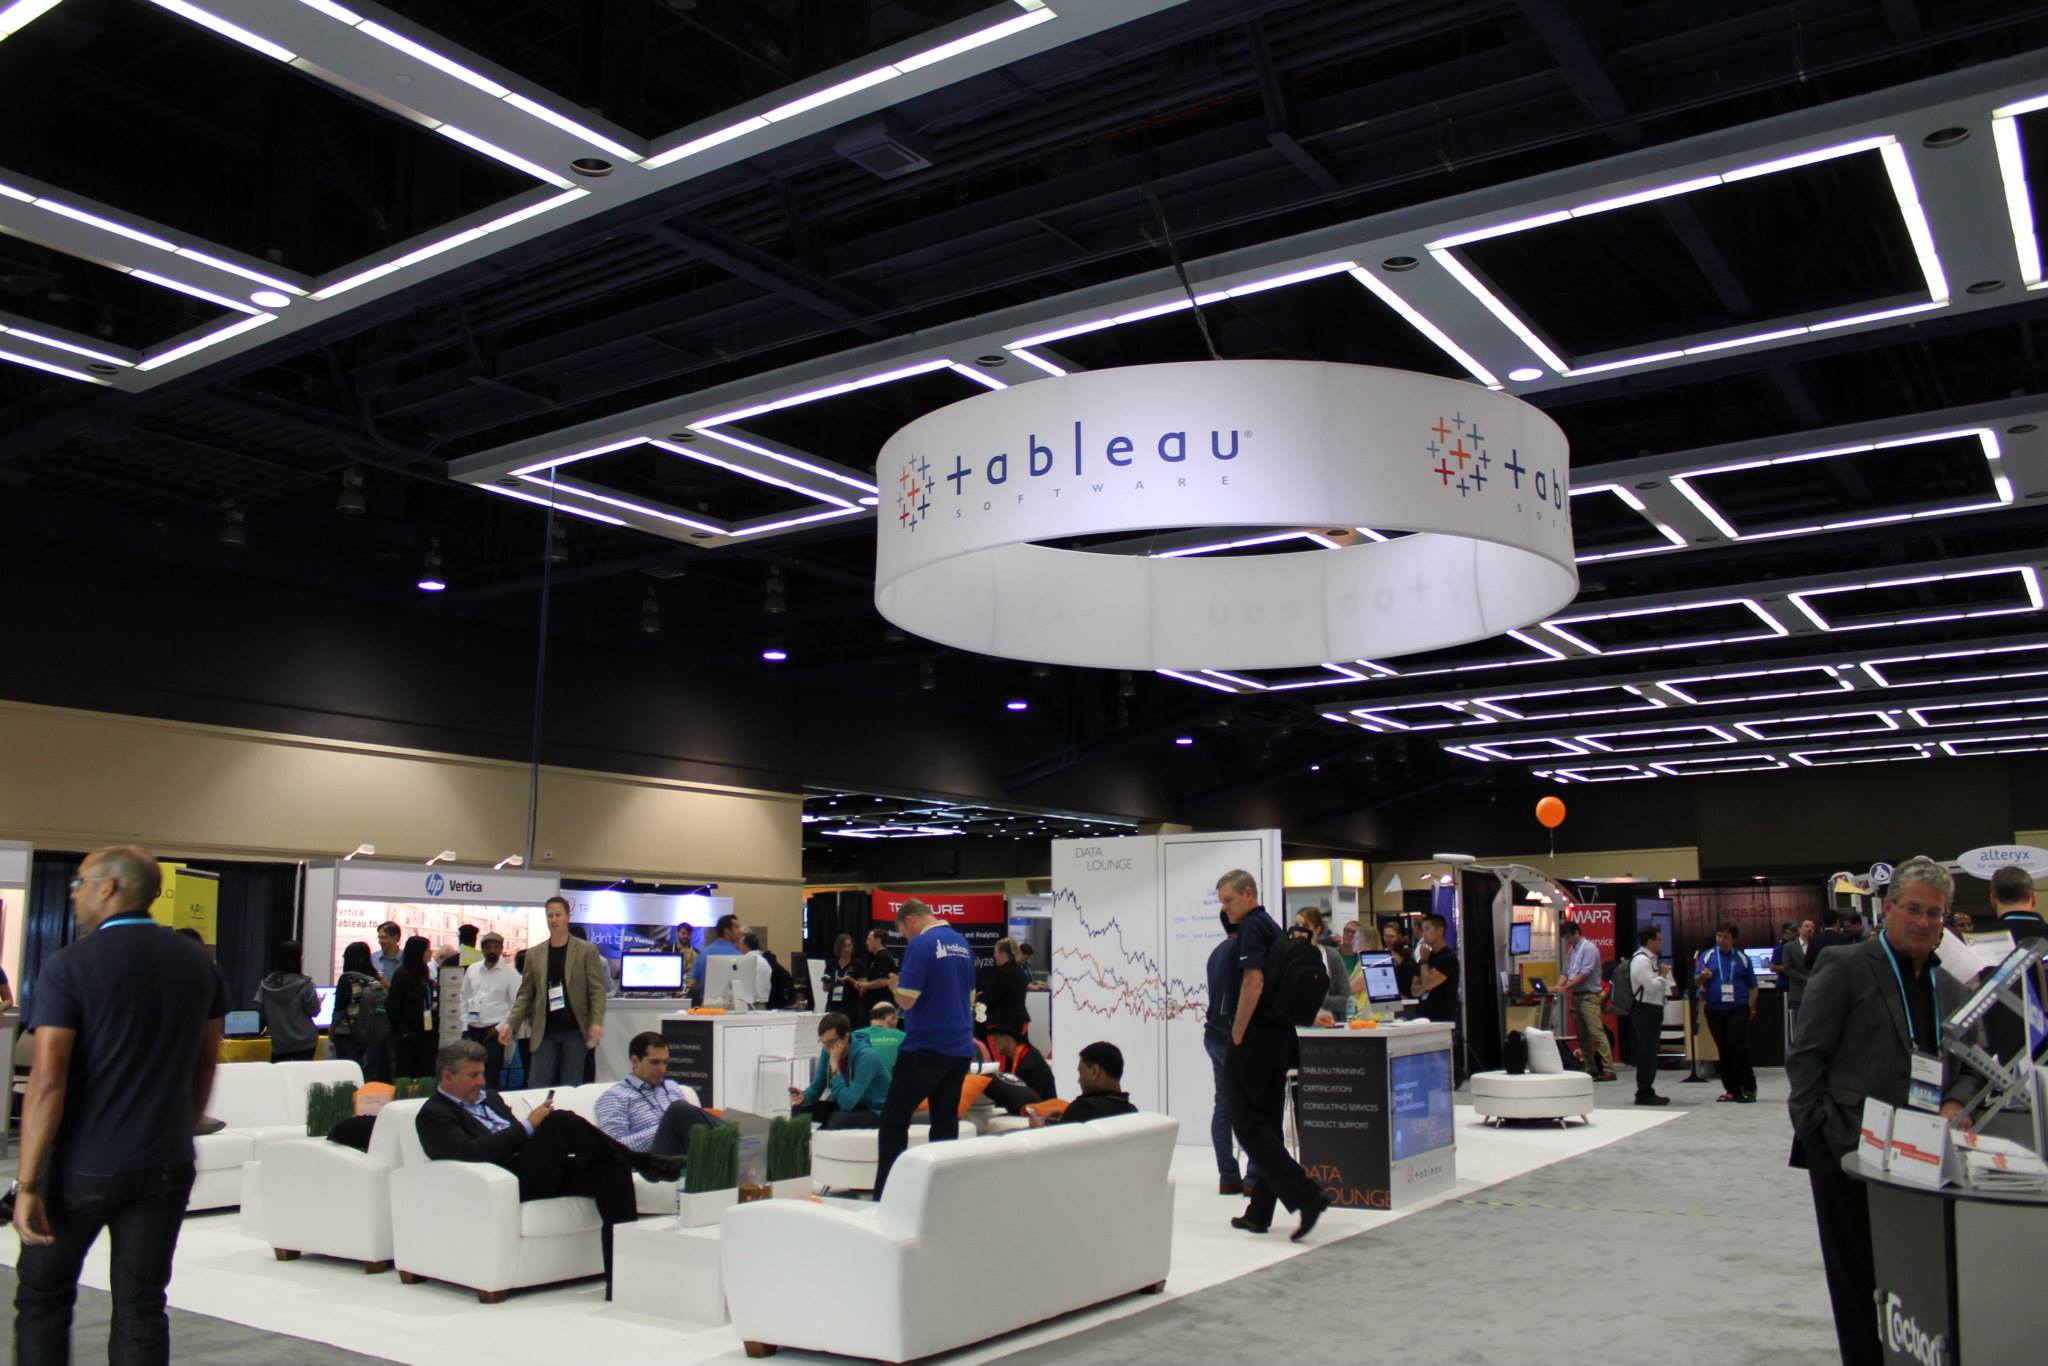 Tableau Conference Expo Hall